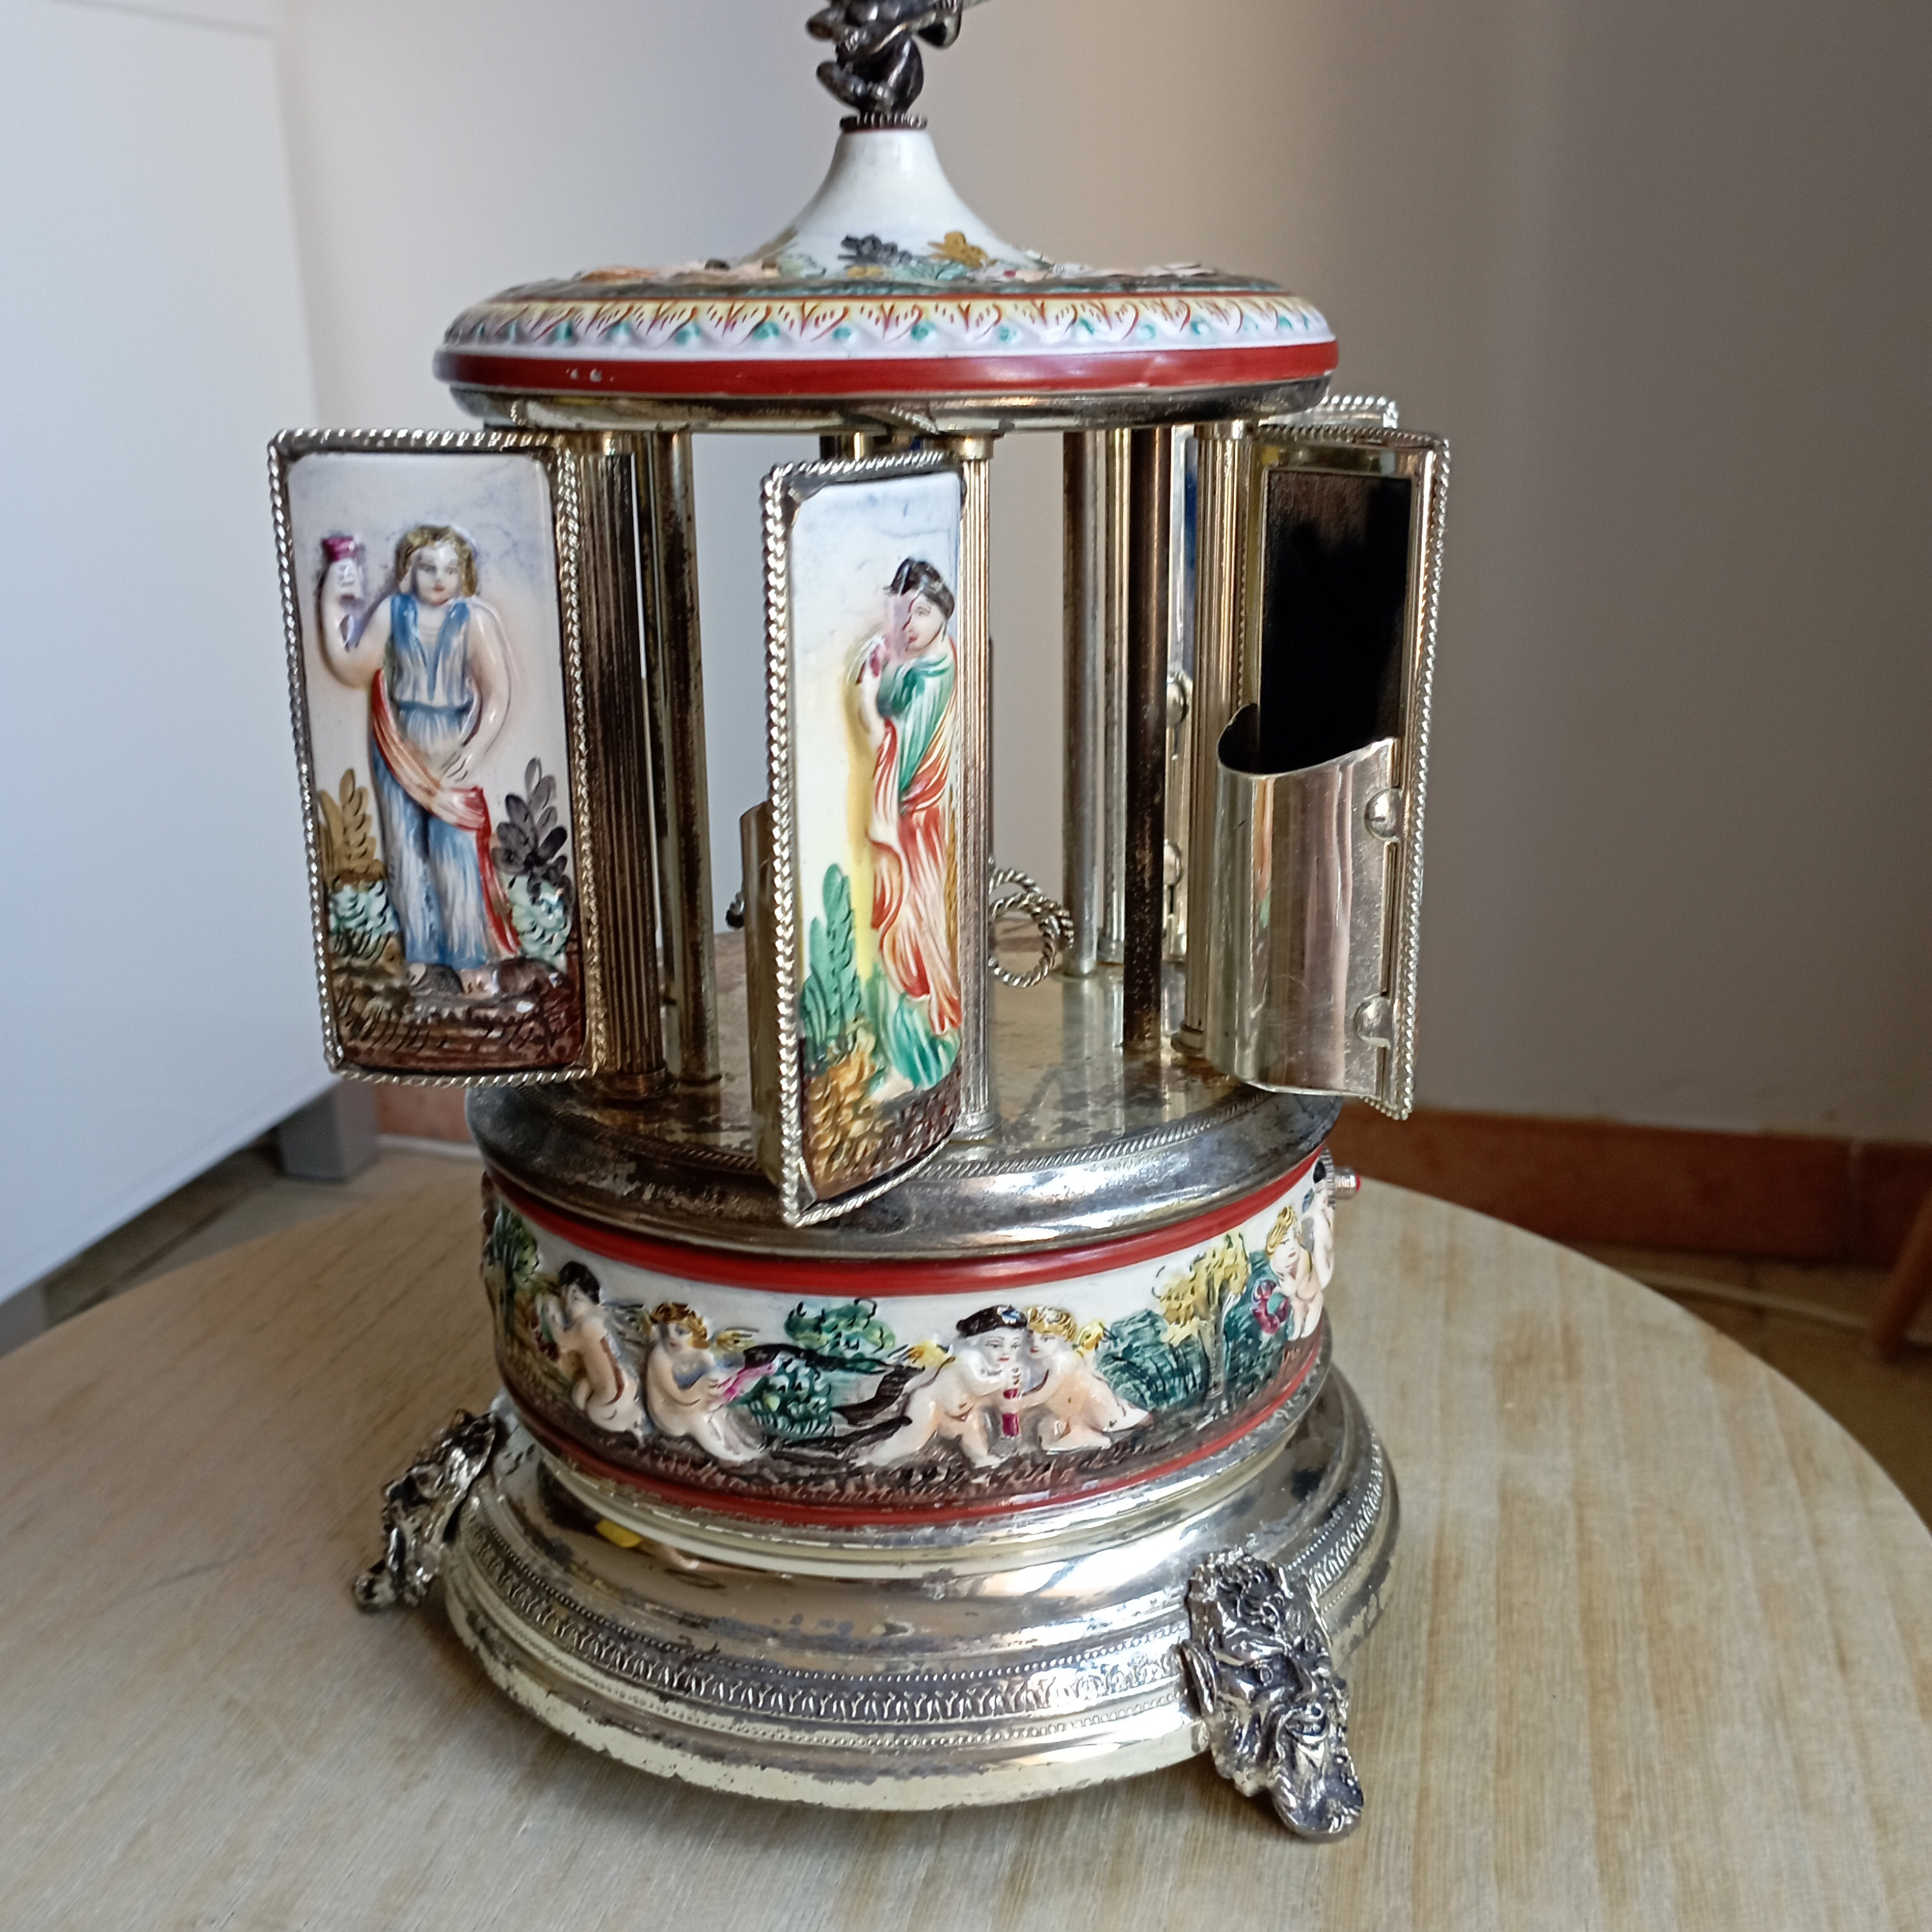 A Reuge Porcelain And Silver Plate Cigarette/lipstick Carousel Music Box  Auction